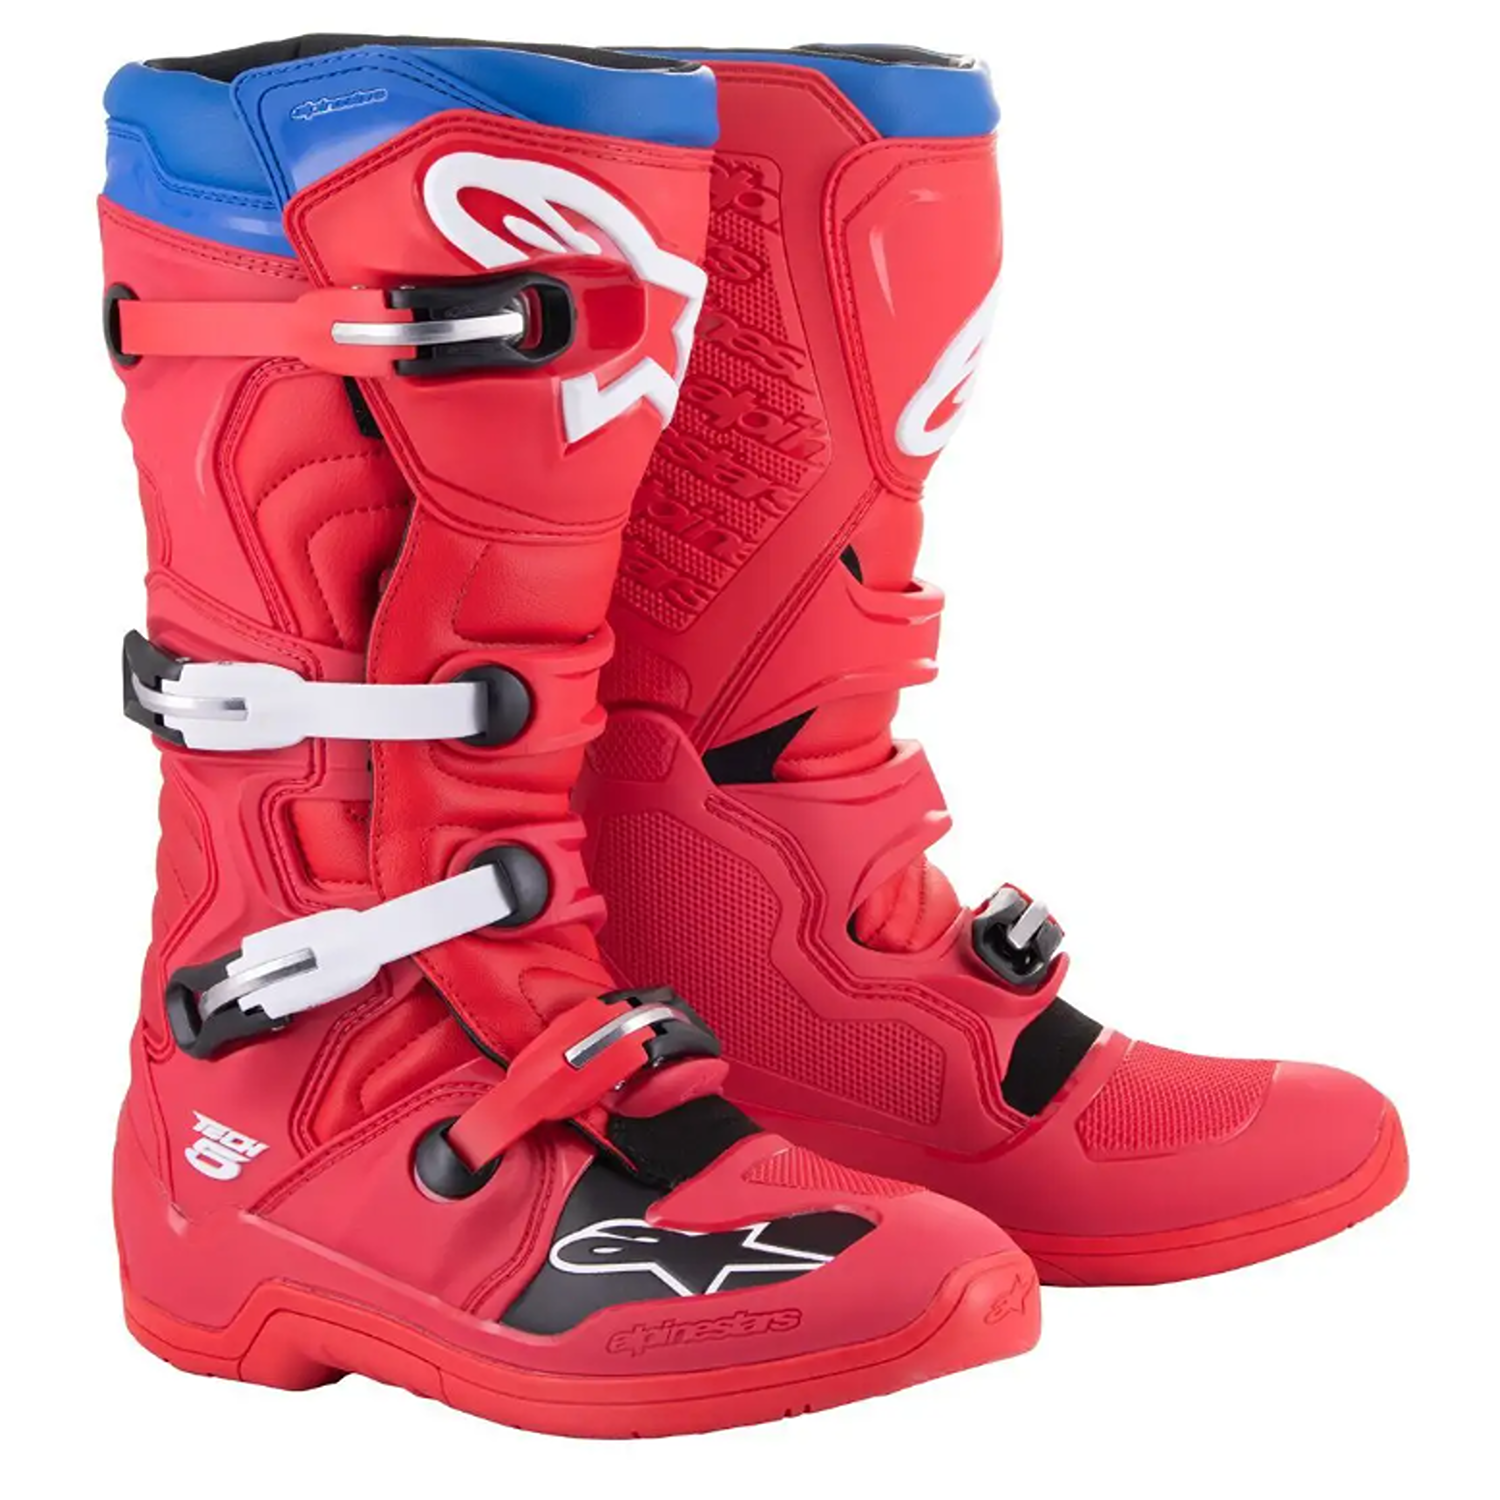 Image of Alpinestars Tech 5 Boots Bright Red Dark Red Blue Taille US 16